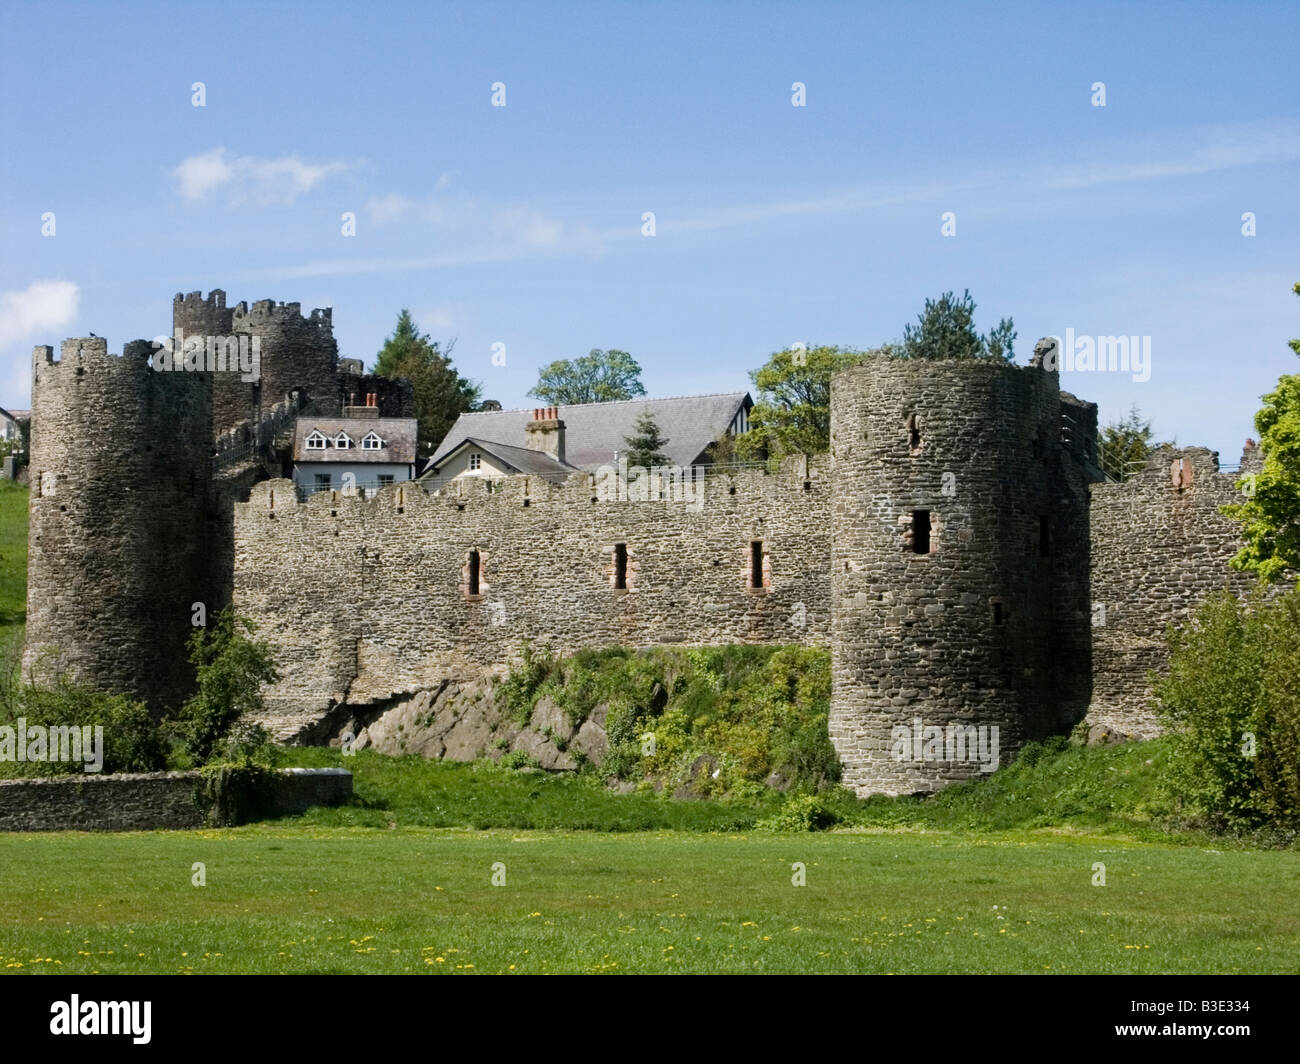 Mediaeval walled town of Conwy, North Wales Stock Photo